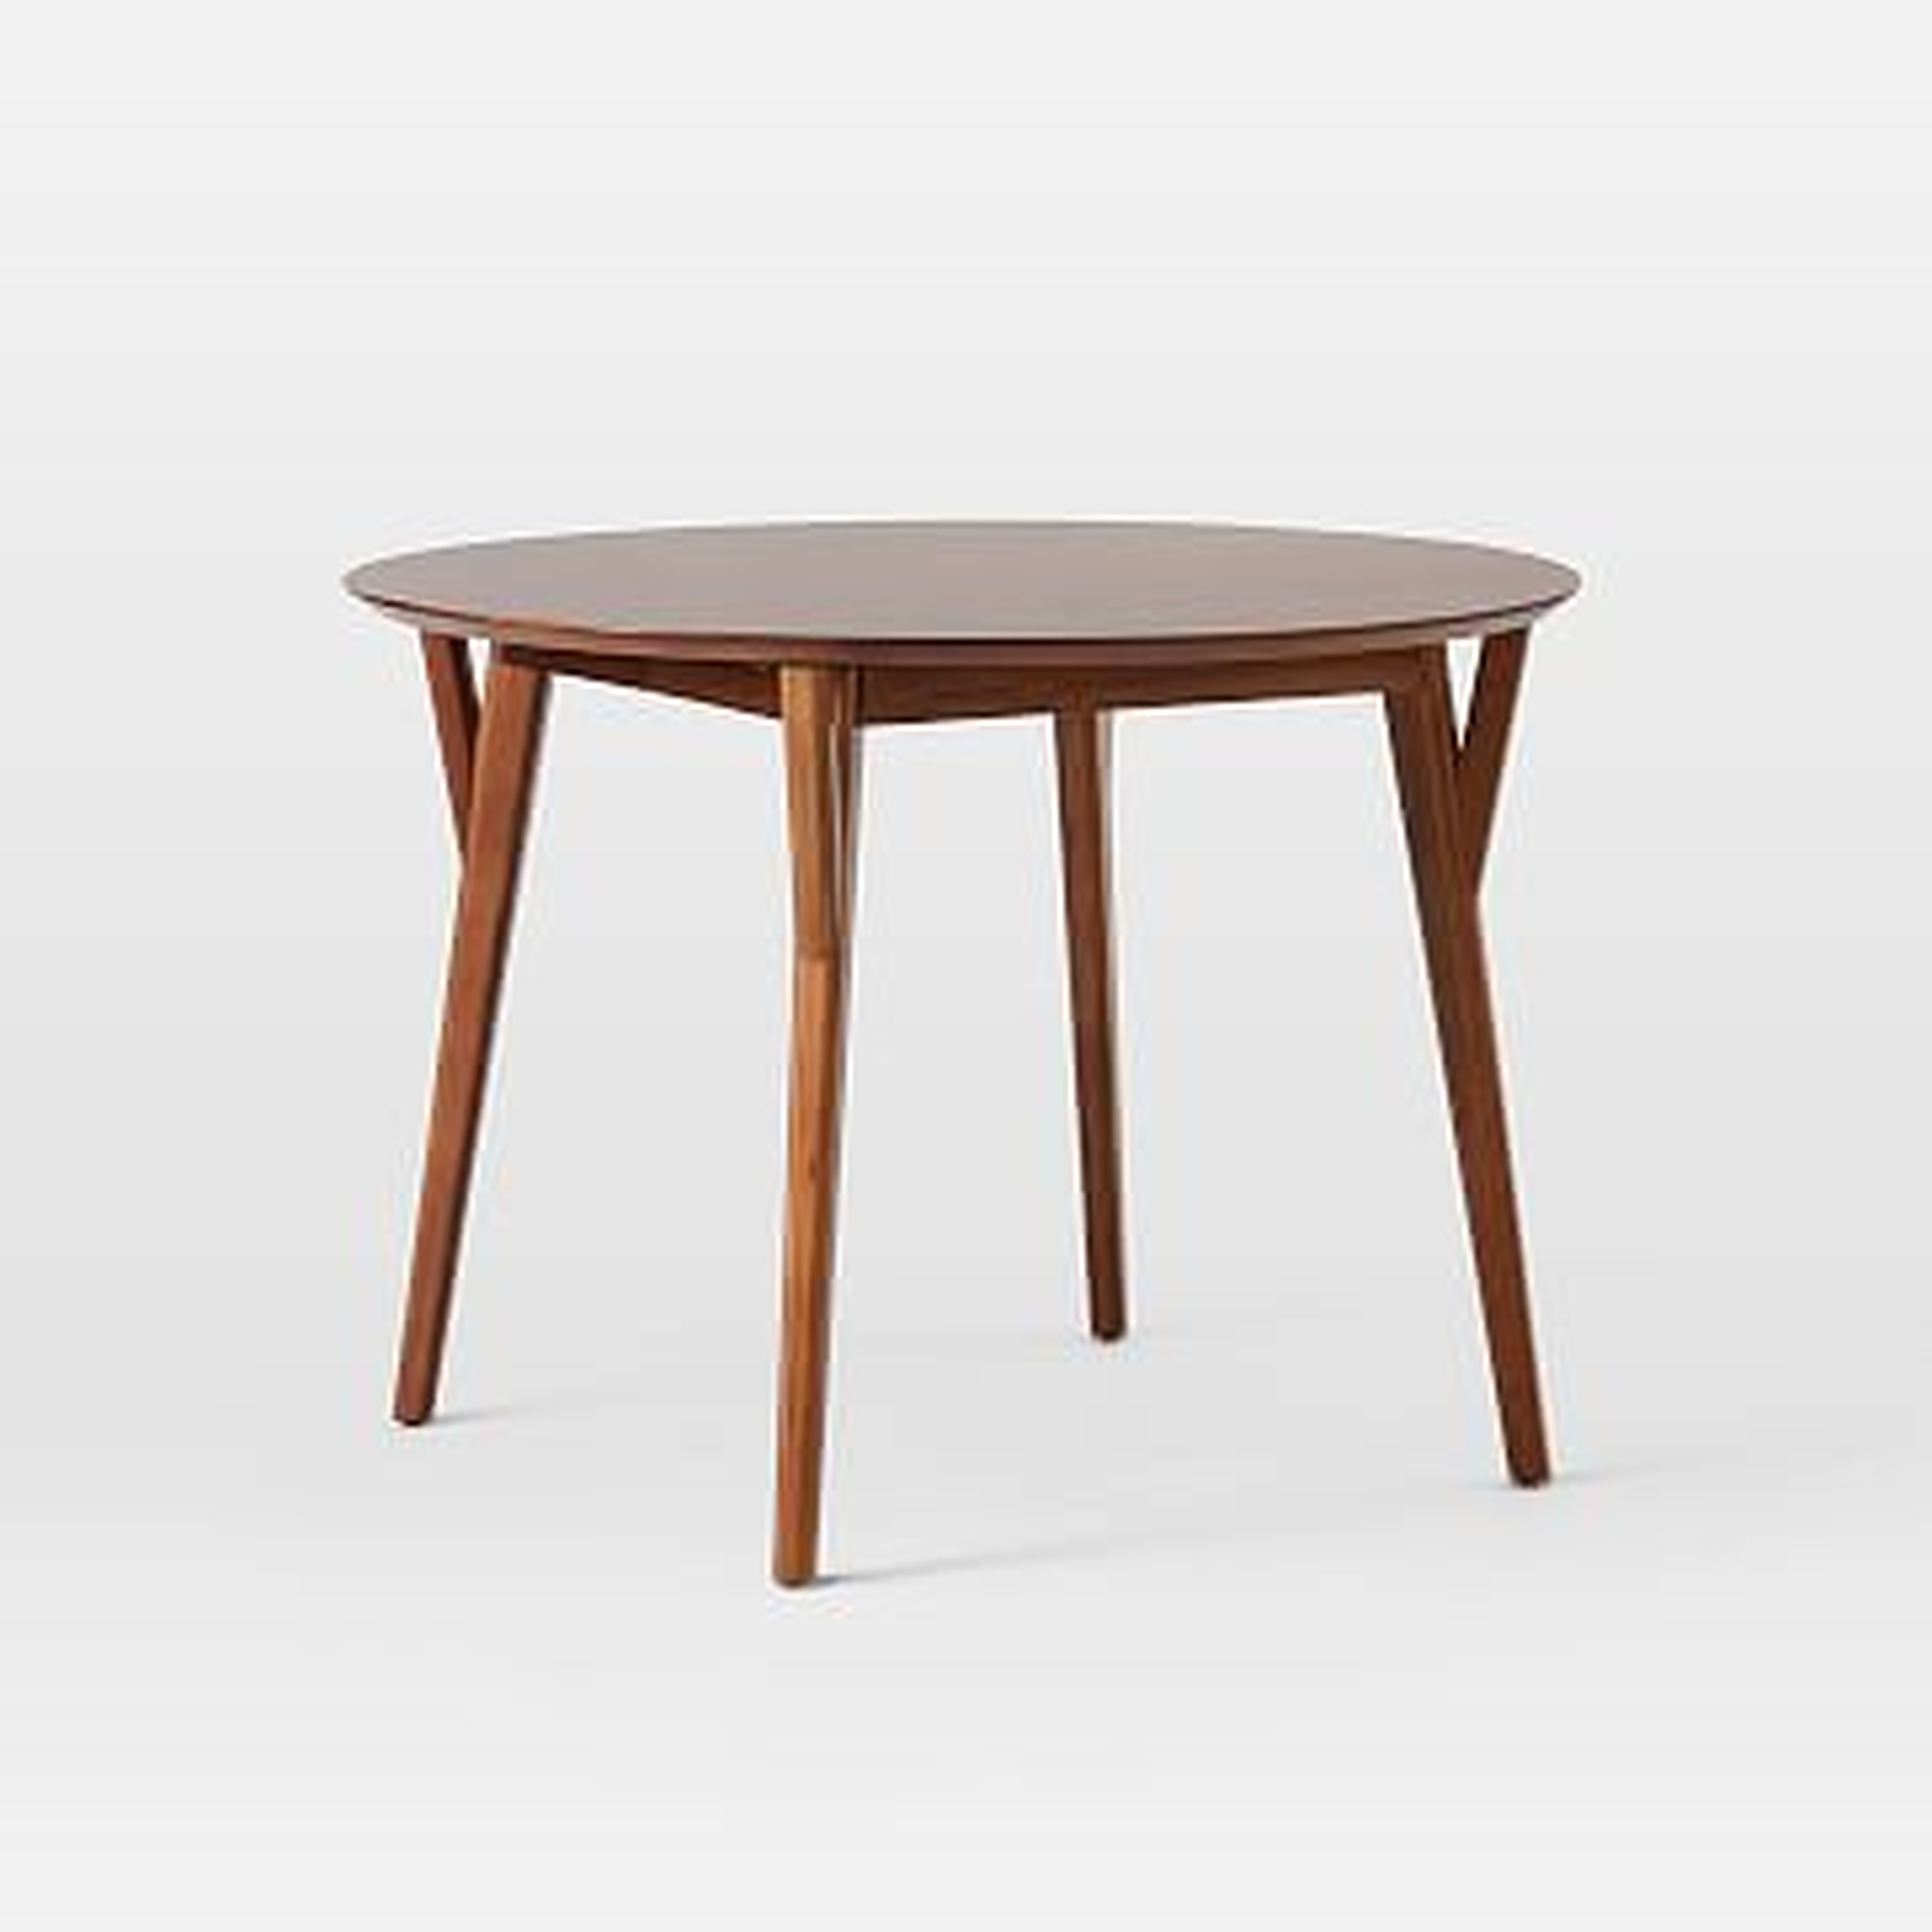 Mid-Century Expandable Dining Table, Round, 42-60", Walnut - West Elm